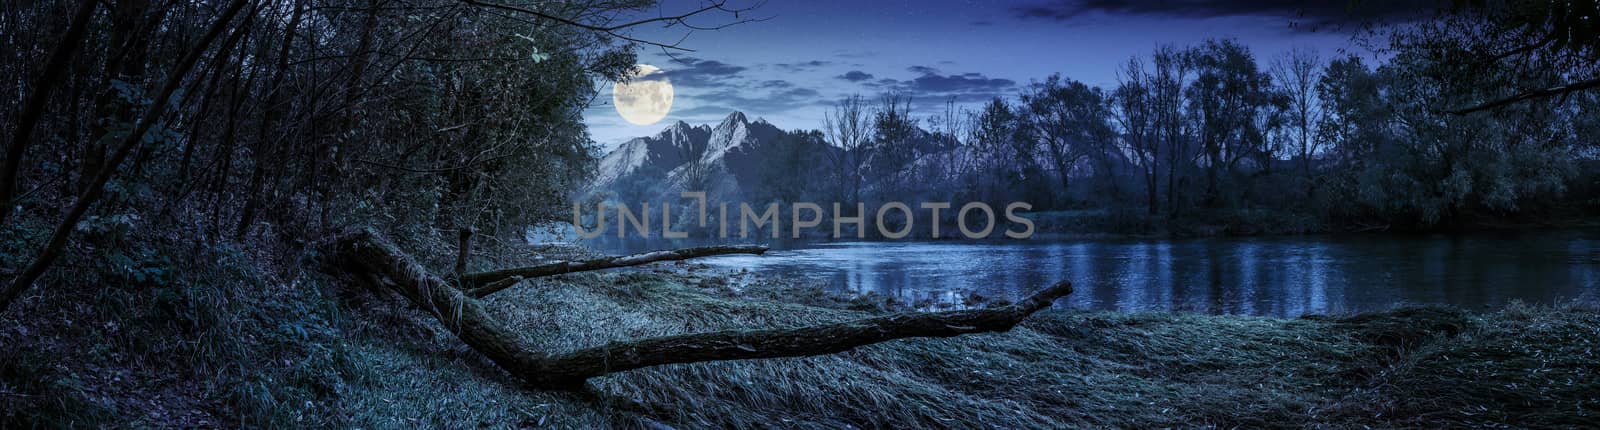 Composite landscape with river and falen tree on the shore in the forest in High Tatra Mountains at night in full moon light